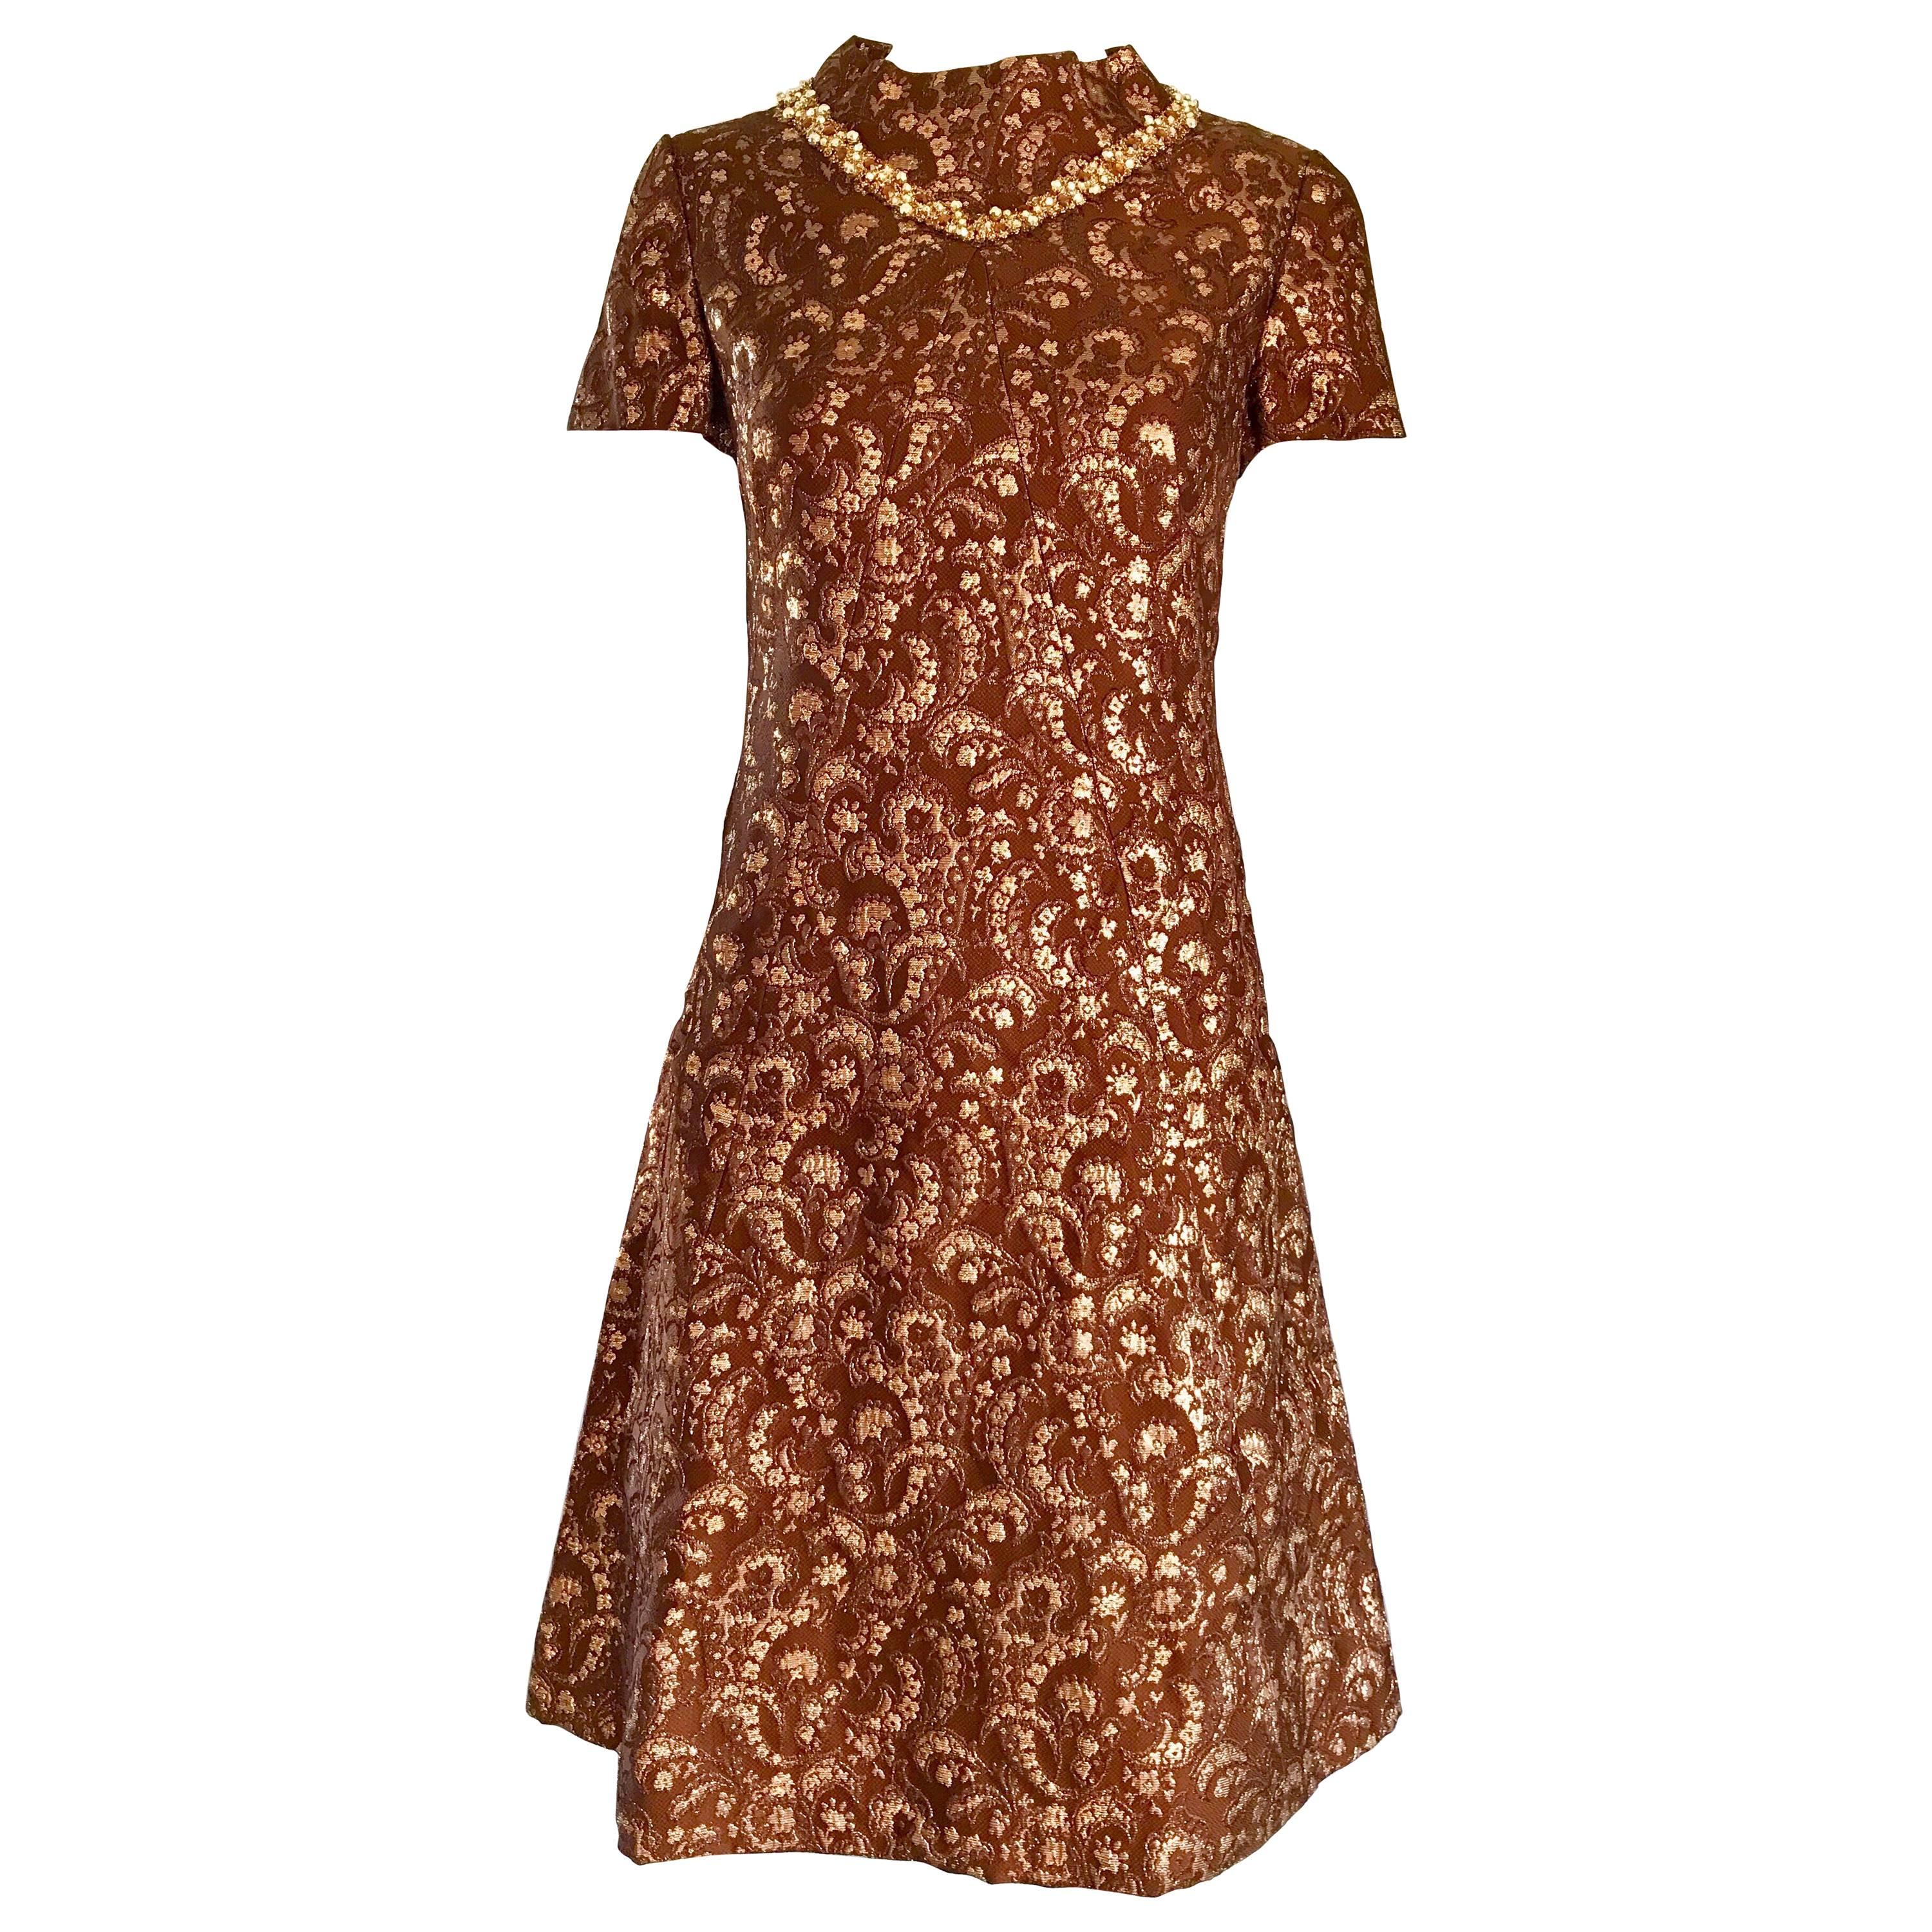 Vintage 60’s Beautiful chocolate brown 1960’s fur lined lace dress Small/ Medium